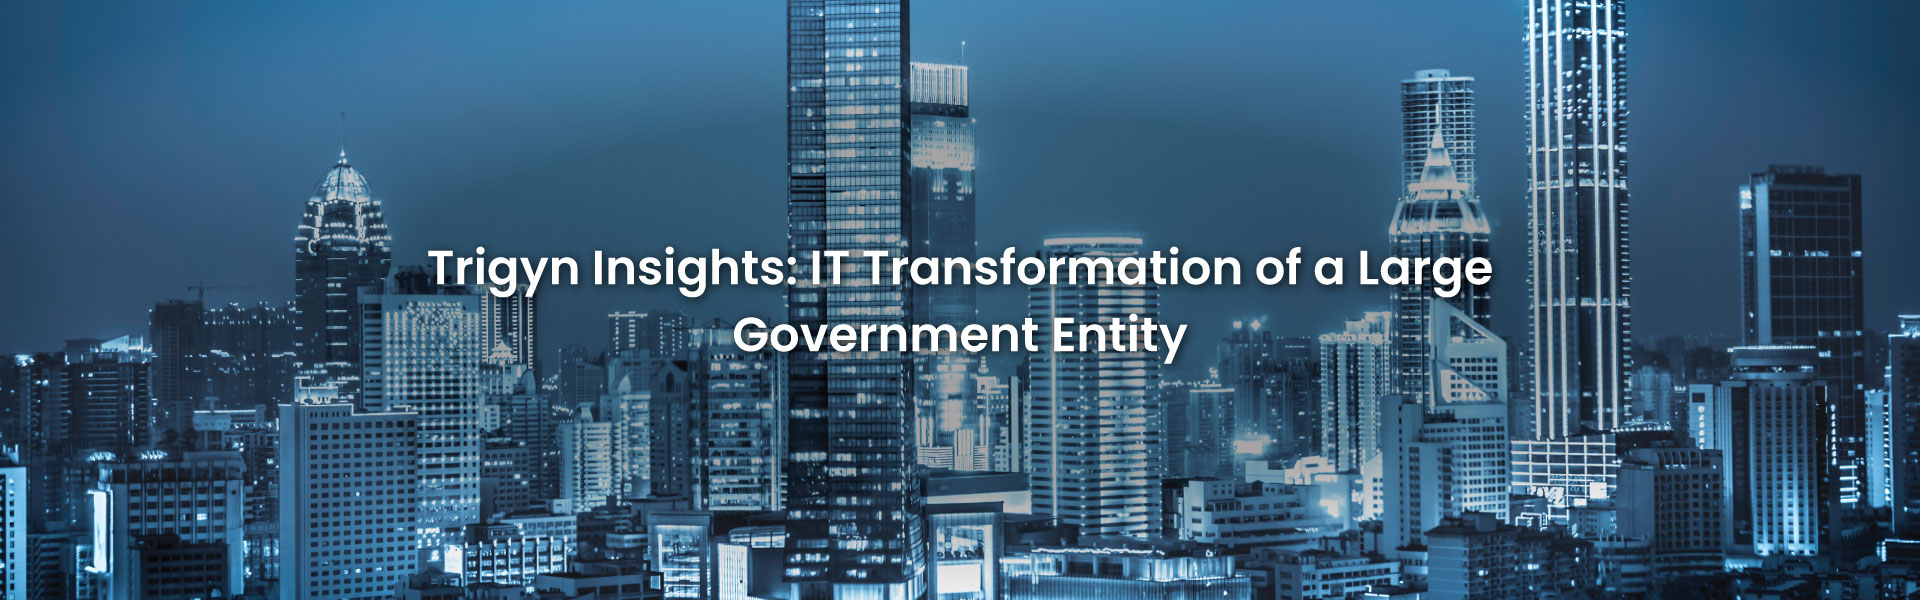 IT Transformation of a Large Government Entity